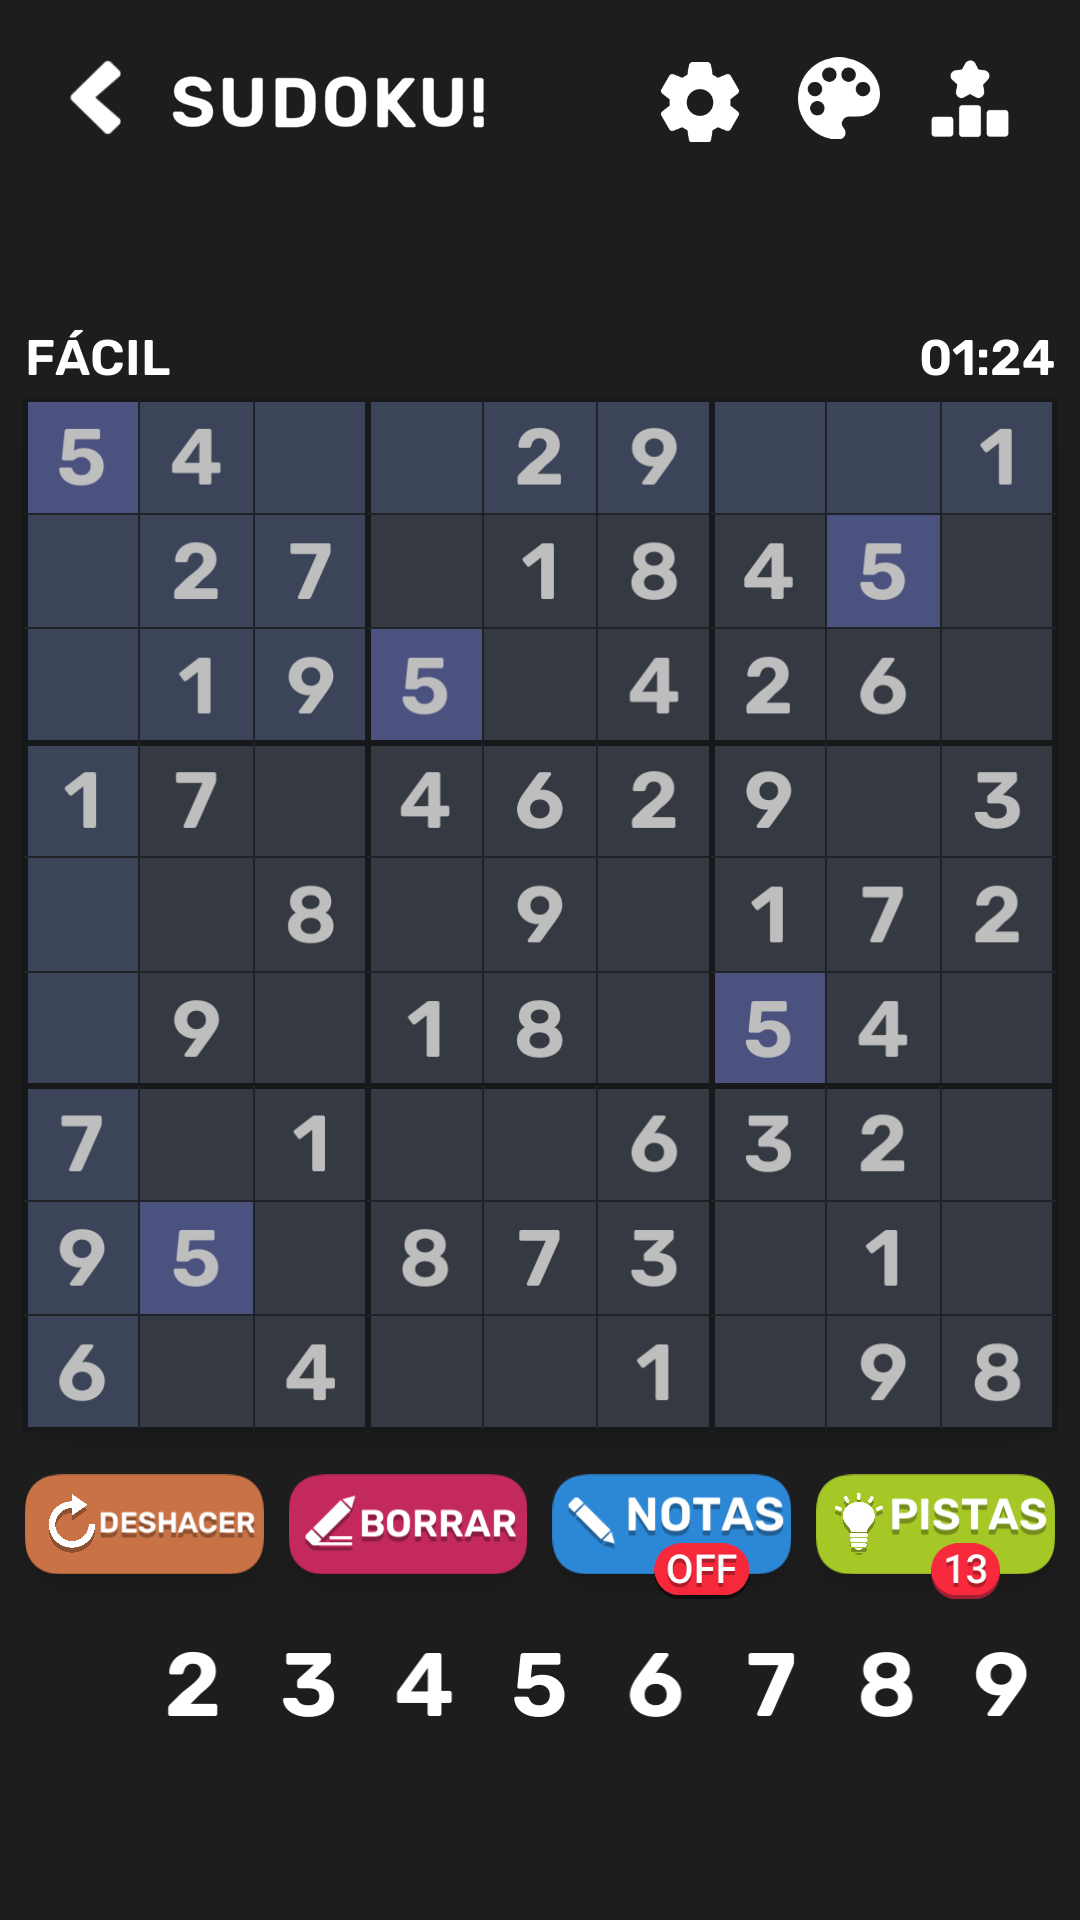 Win and become a sudoku master